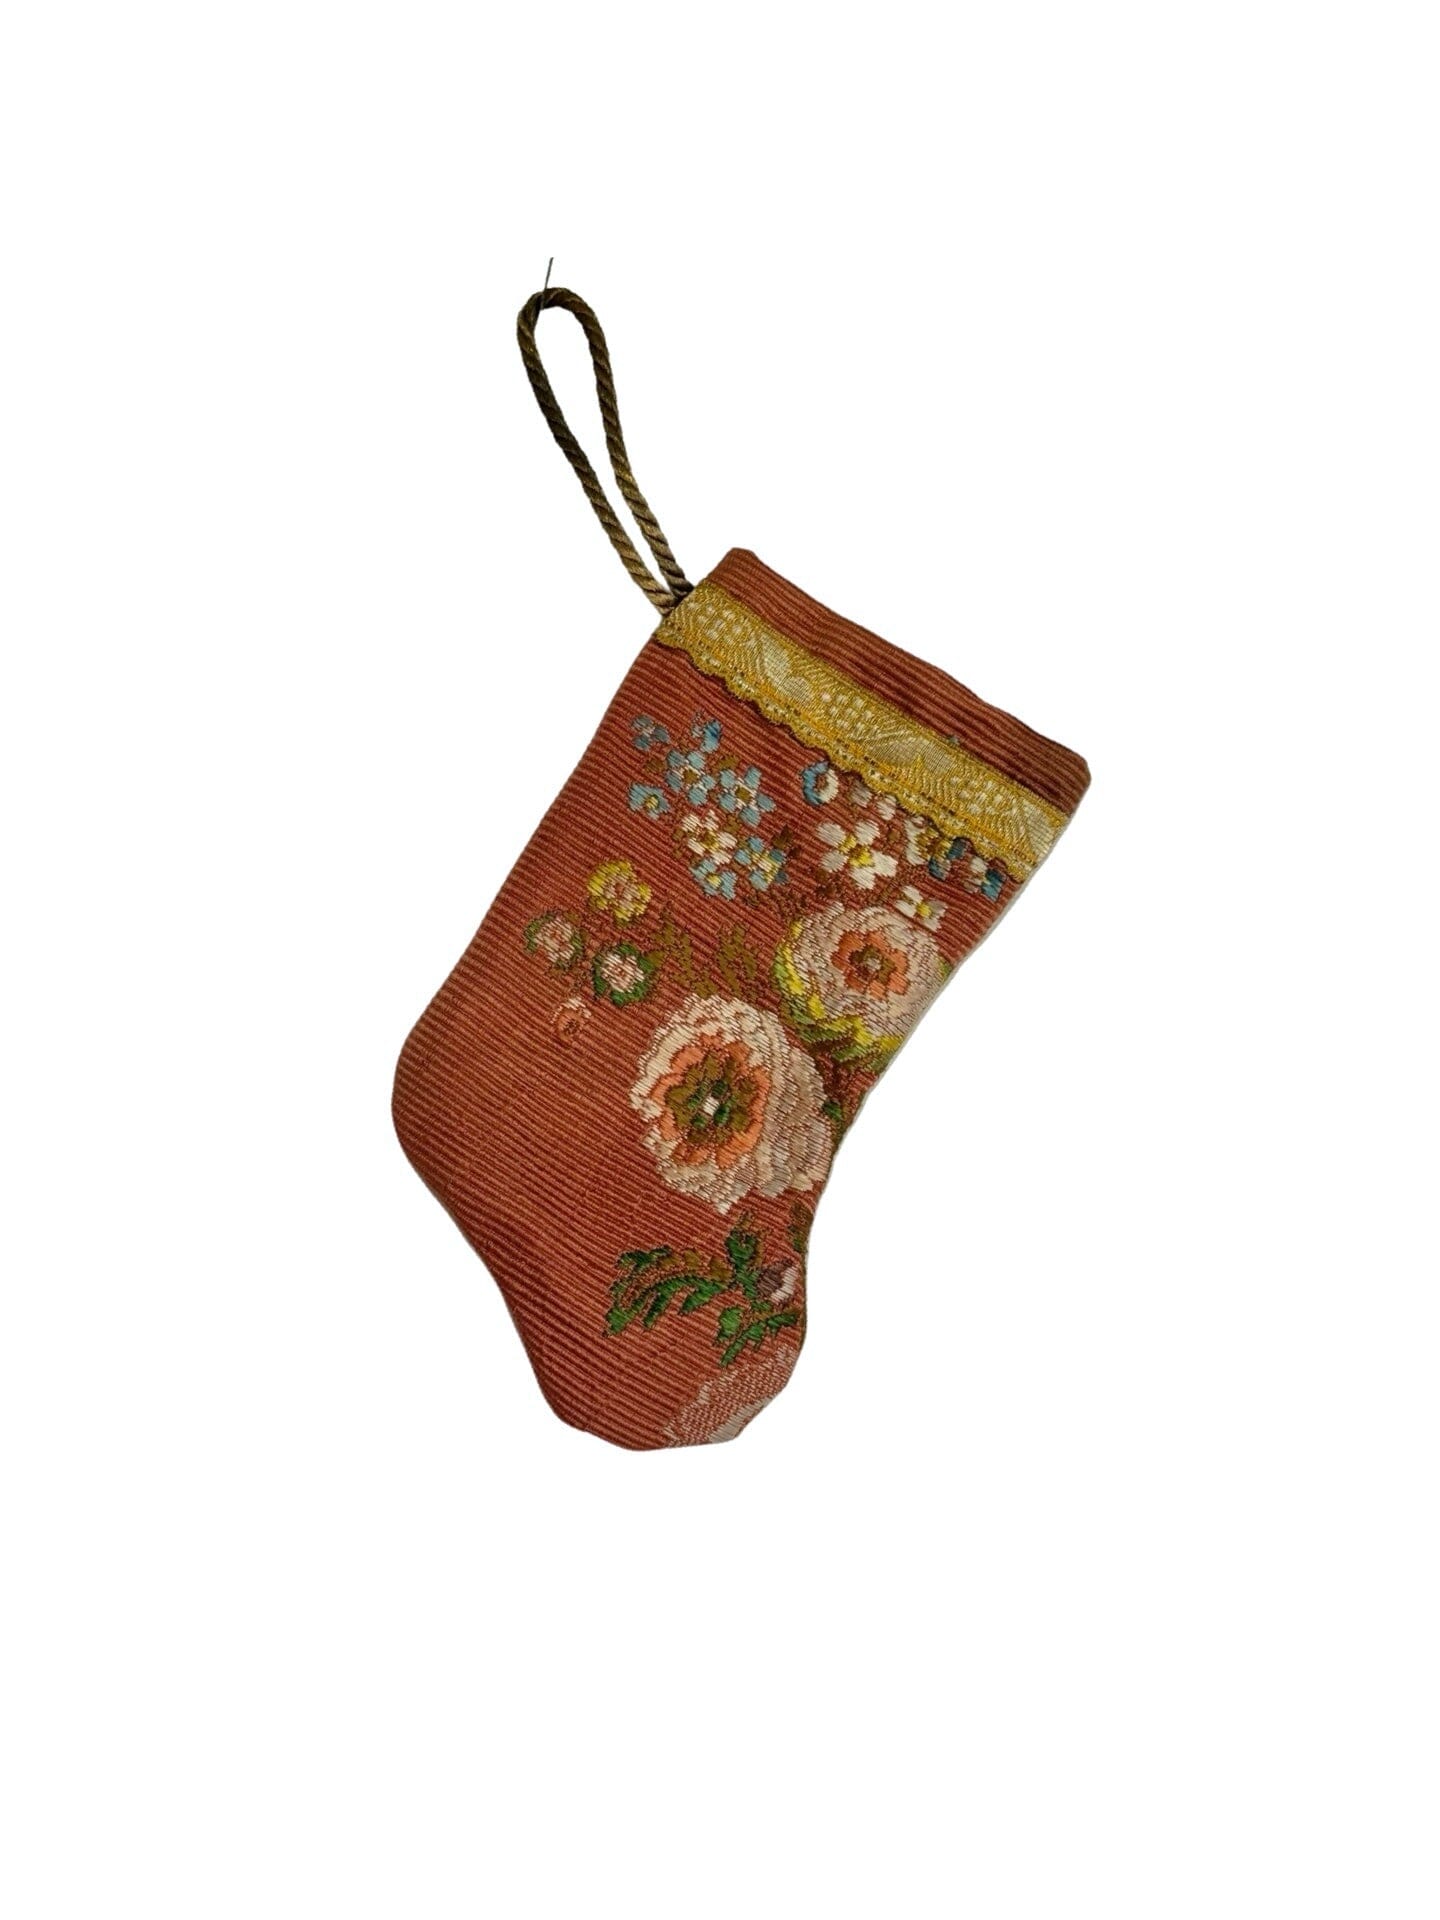 Handmade Mini Stocking Made From Vintage Fabric and Trims- Bronze Rose Floral Ornament B. Viz Design N 